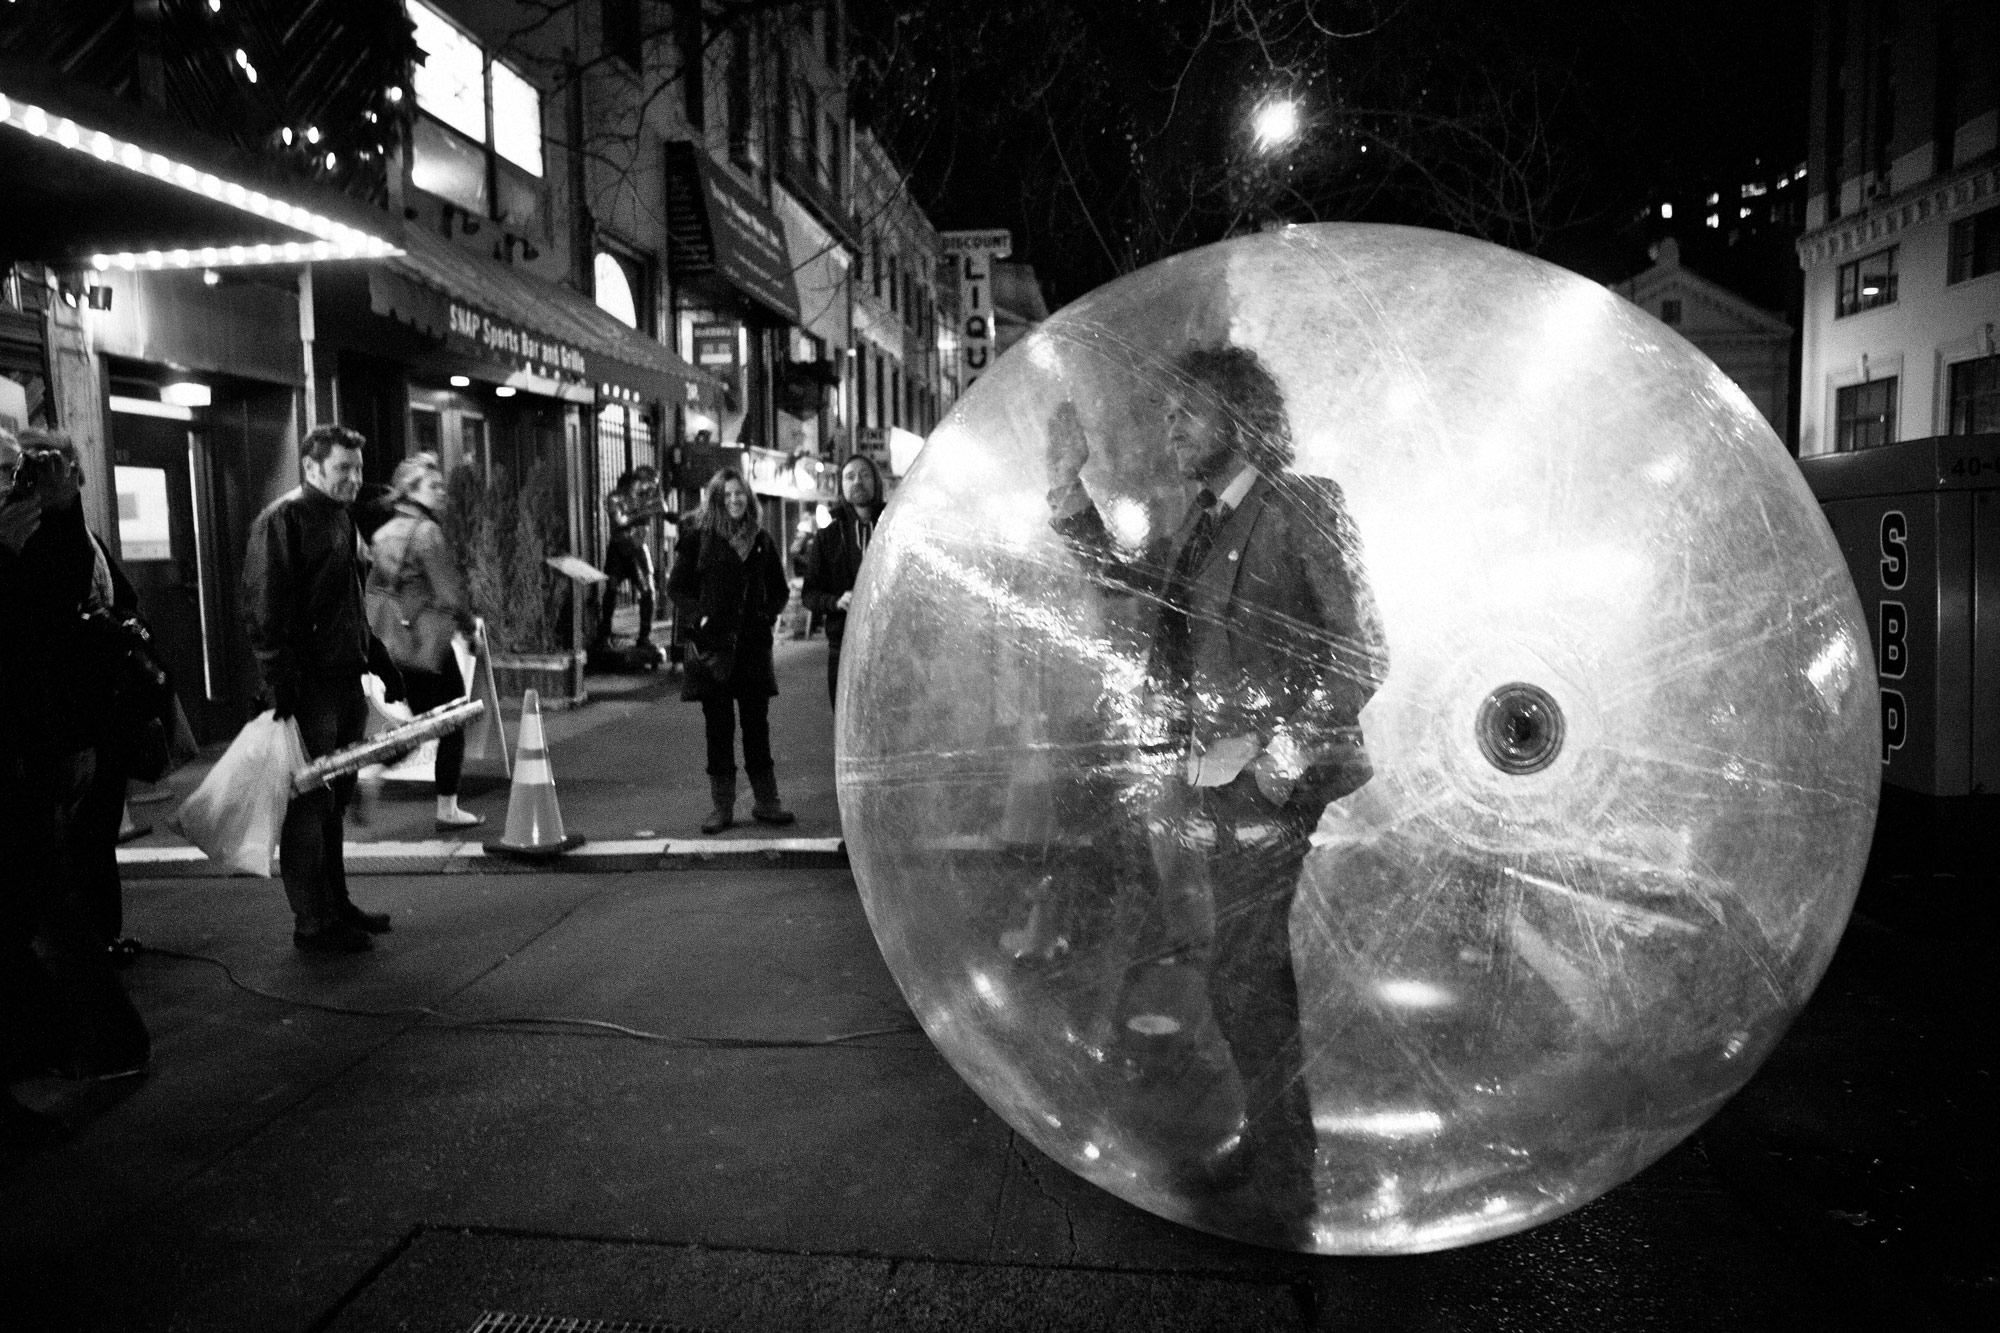 On 14th Street in New York, Wayne Coyne of the Flaming Lips tries out his bubble before his performance 